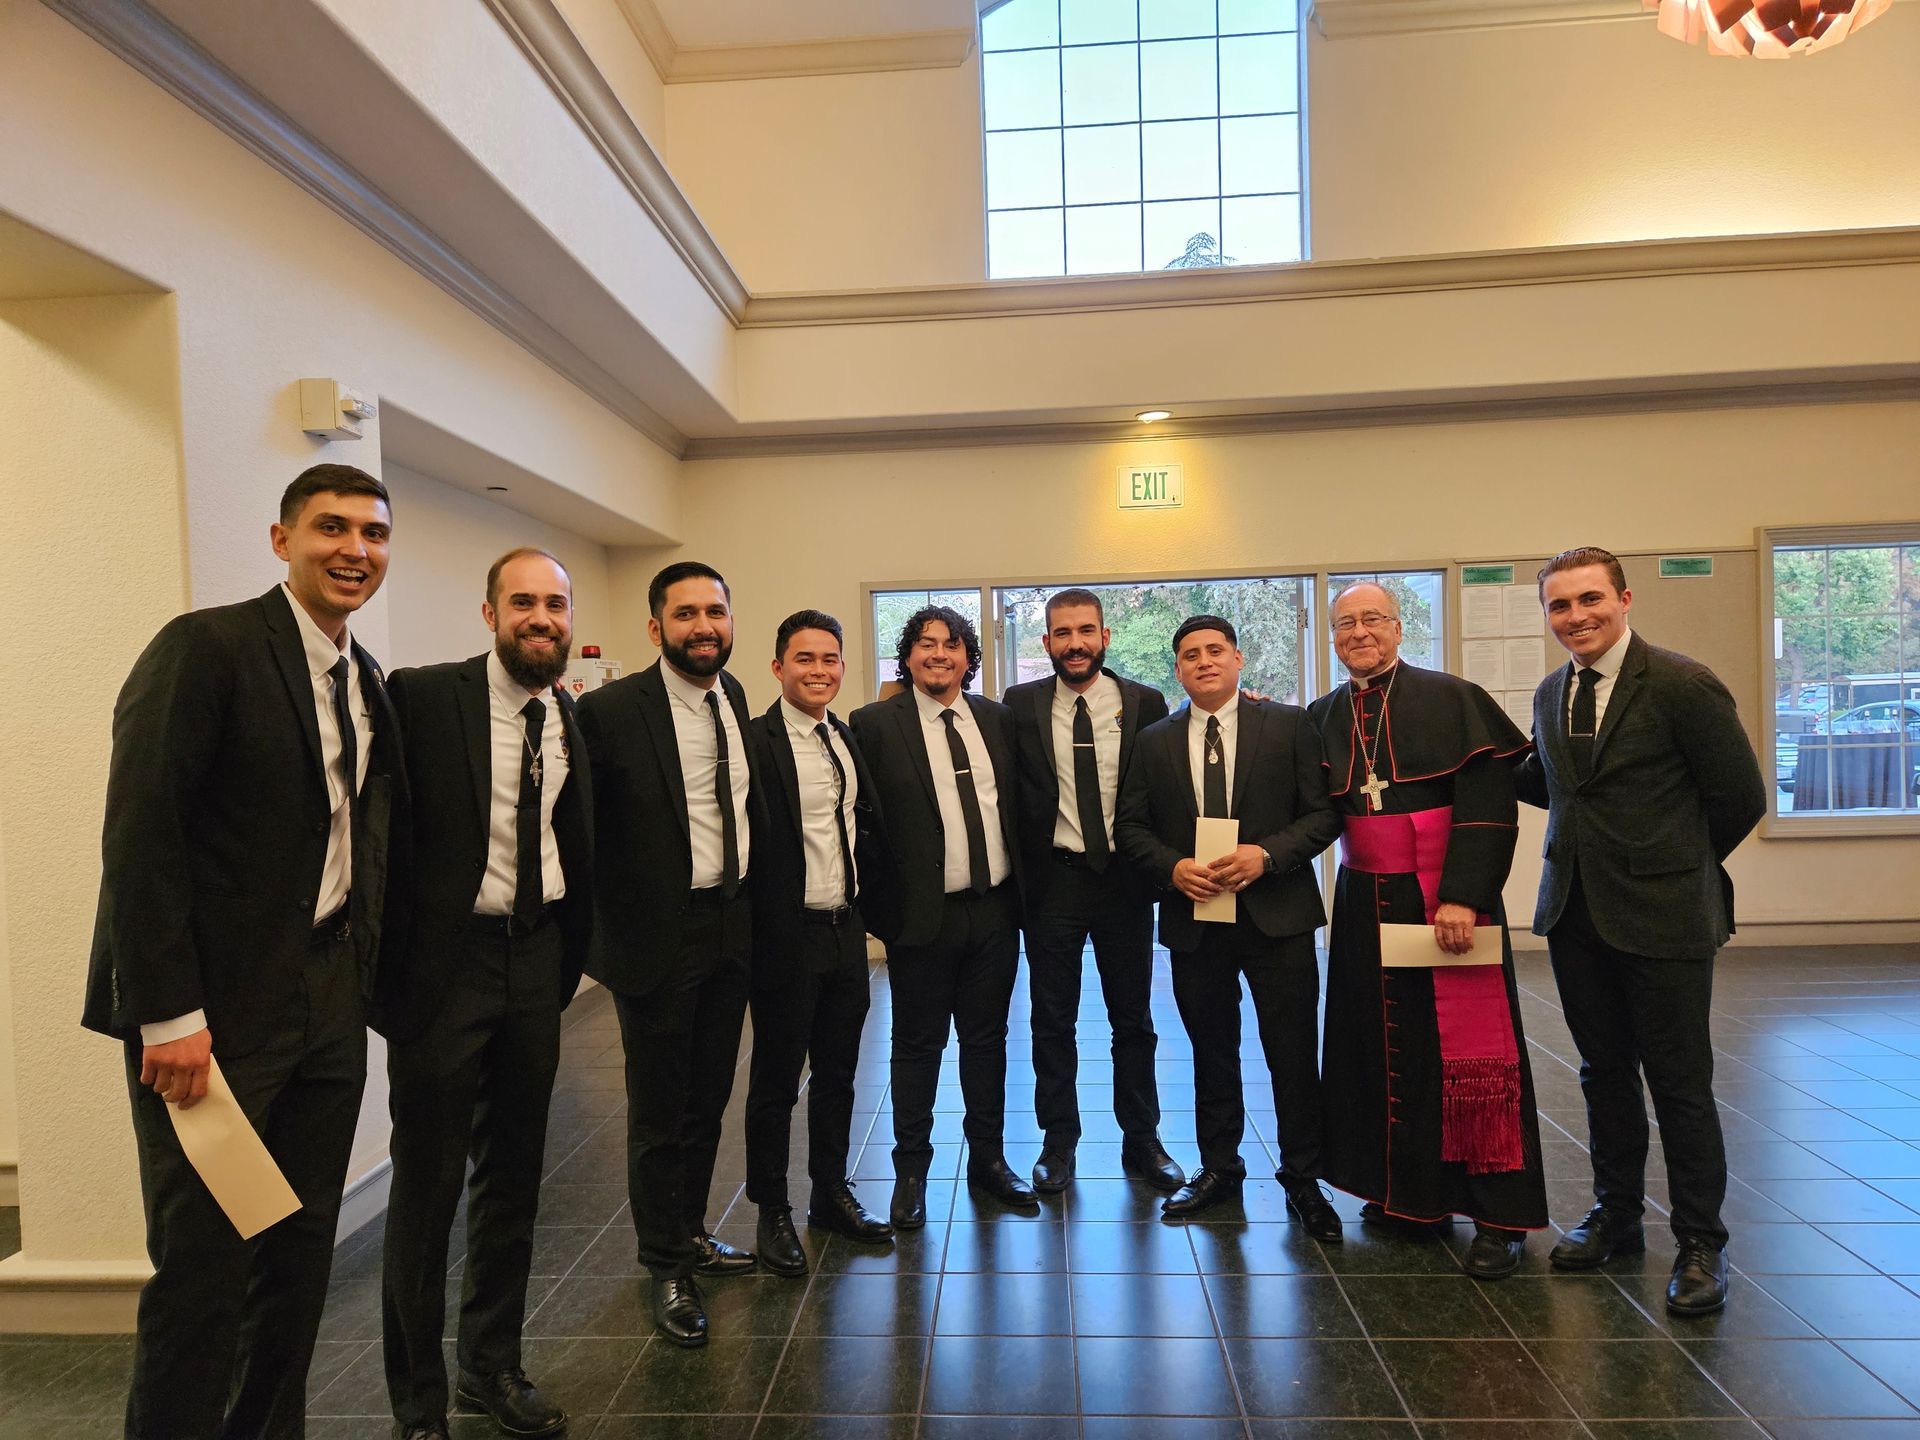 Diocese of Stockton - Bishop Cotta and the Seminarians at the 2023 Bishop's Awards Dinner